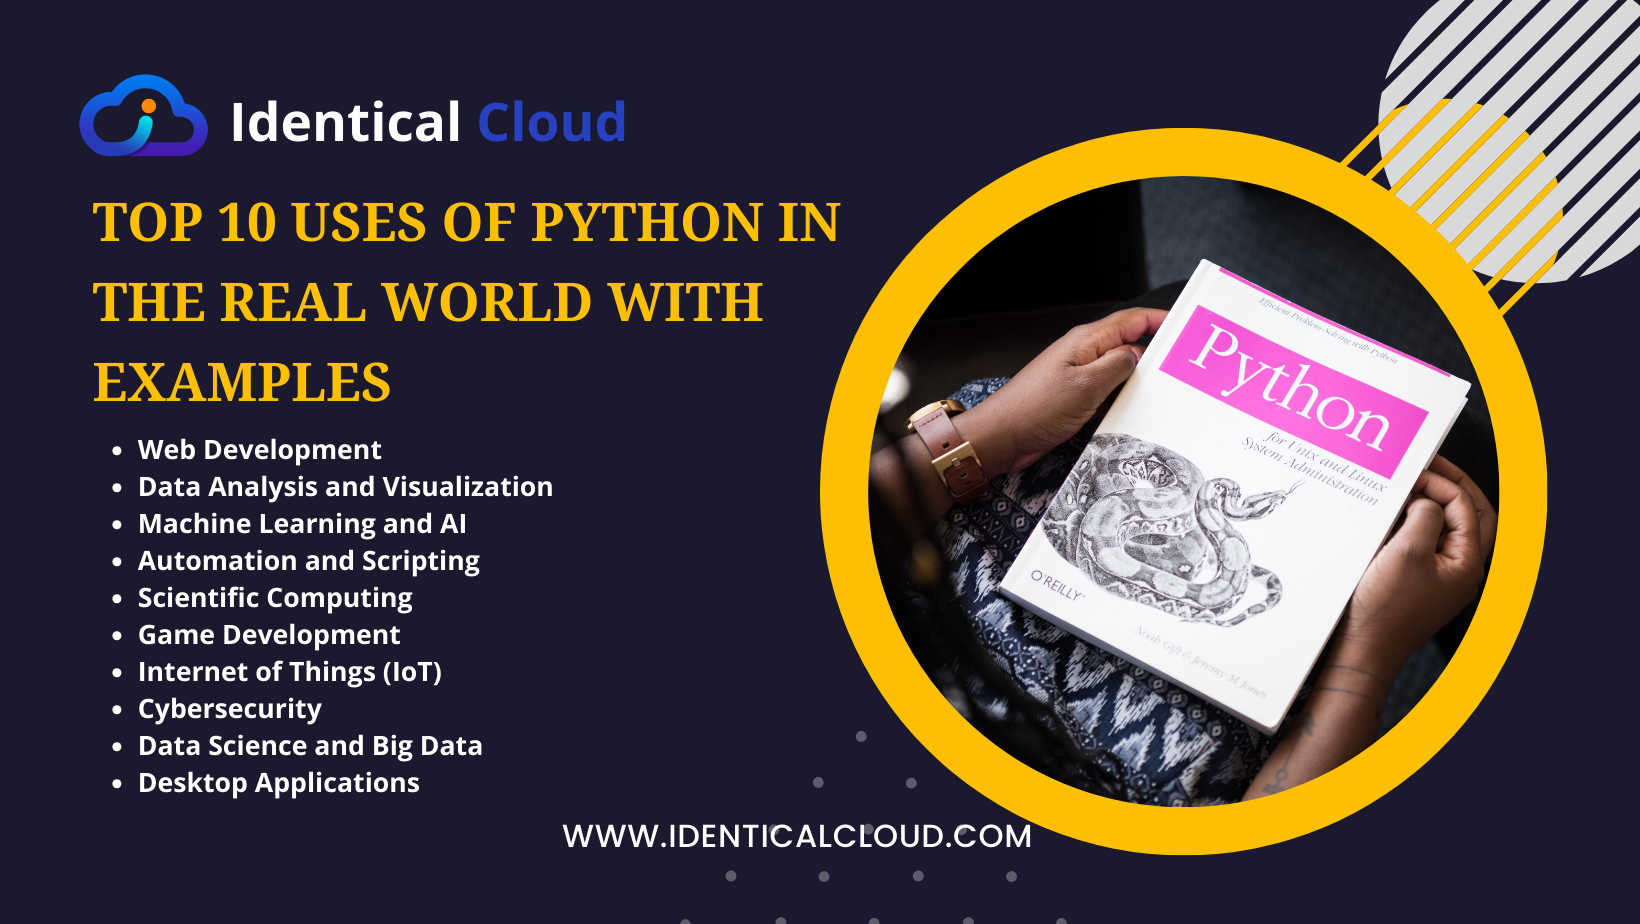 Top 10 Uses of Python in the Real World with examples - identicalcloud.com